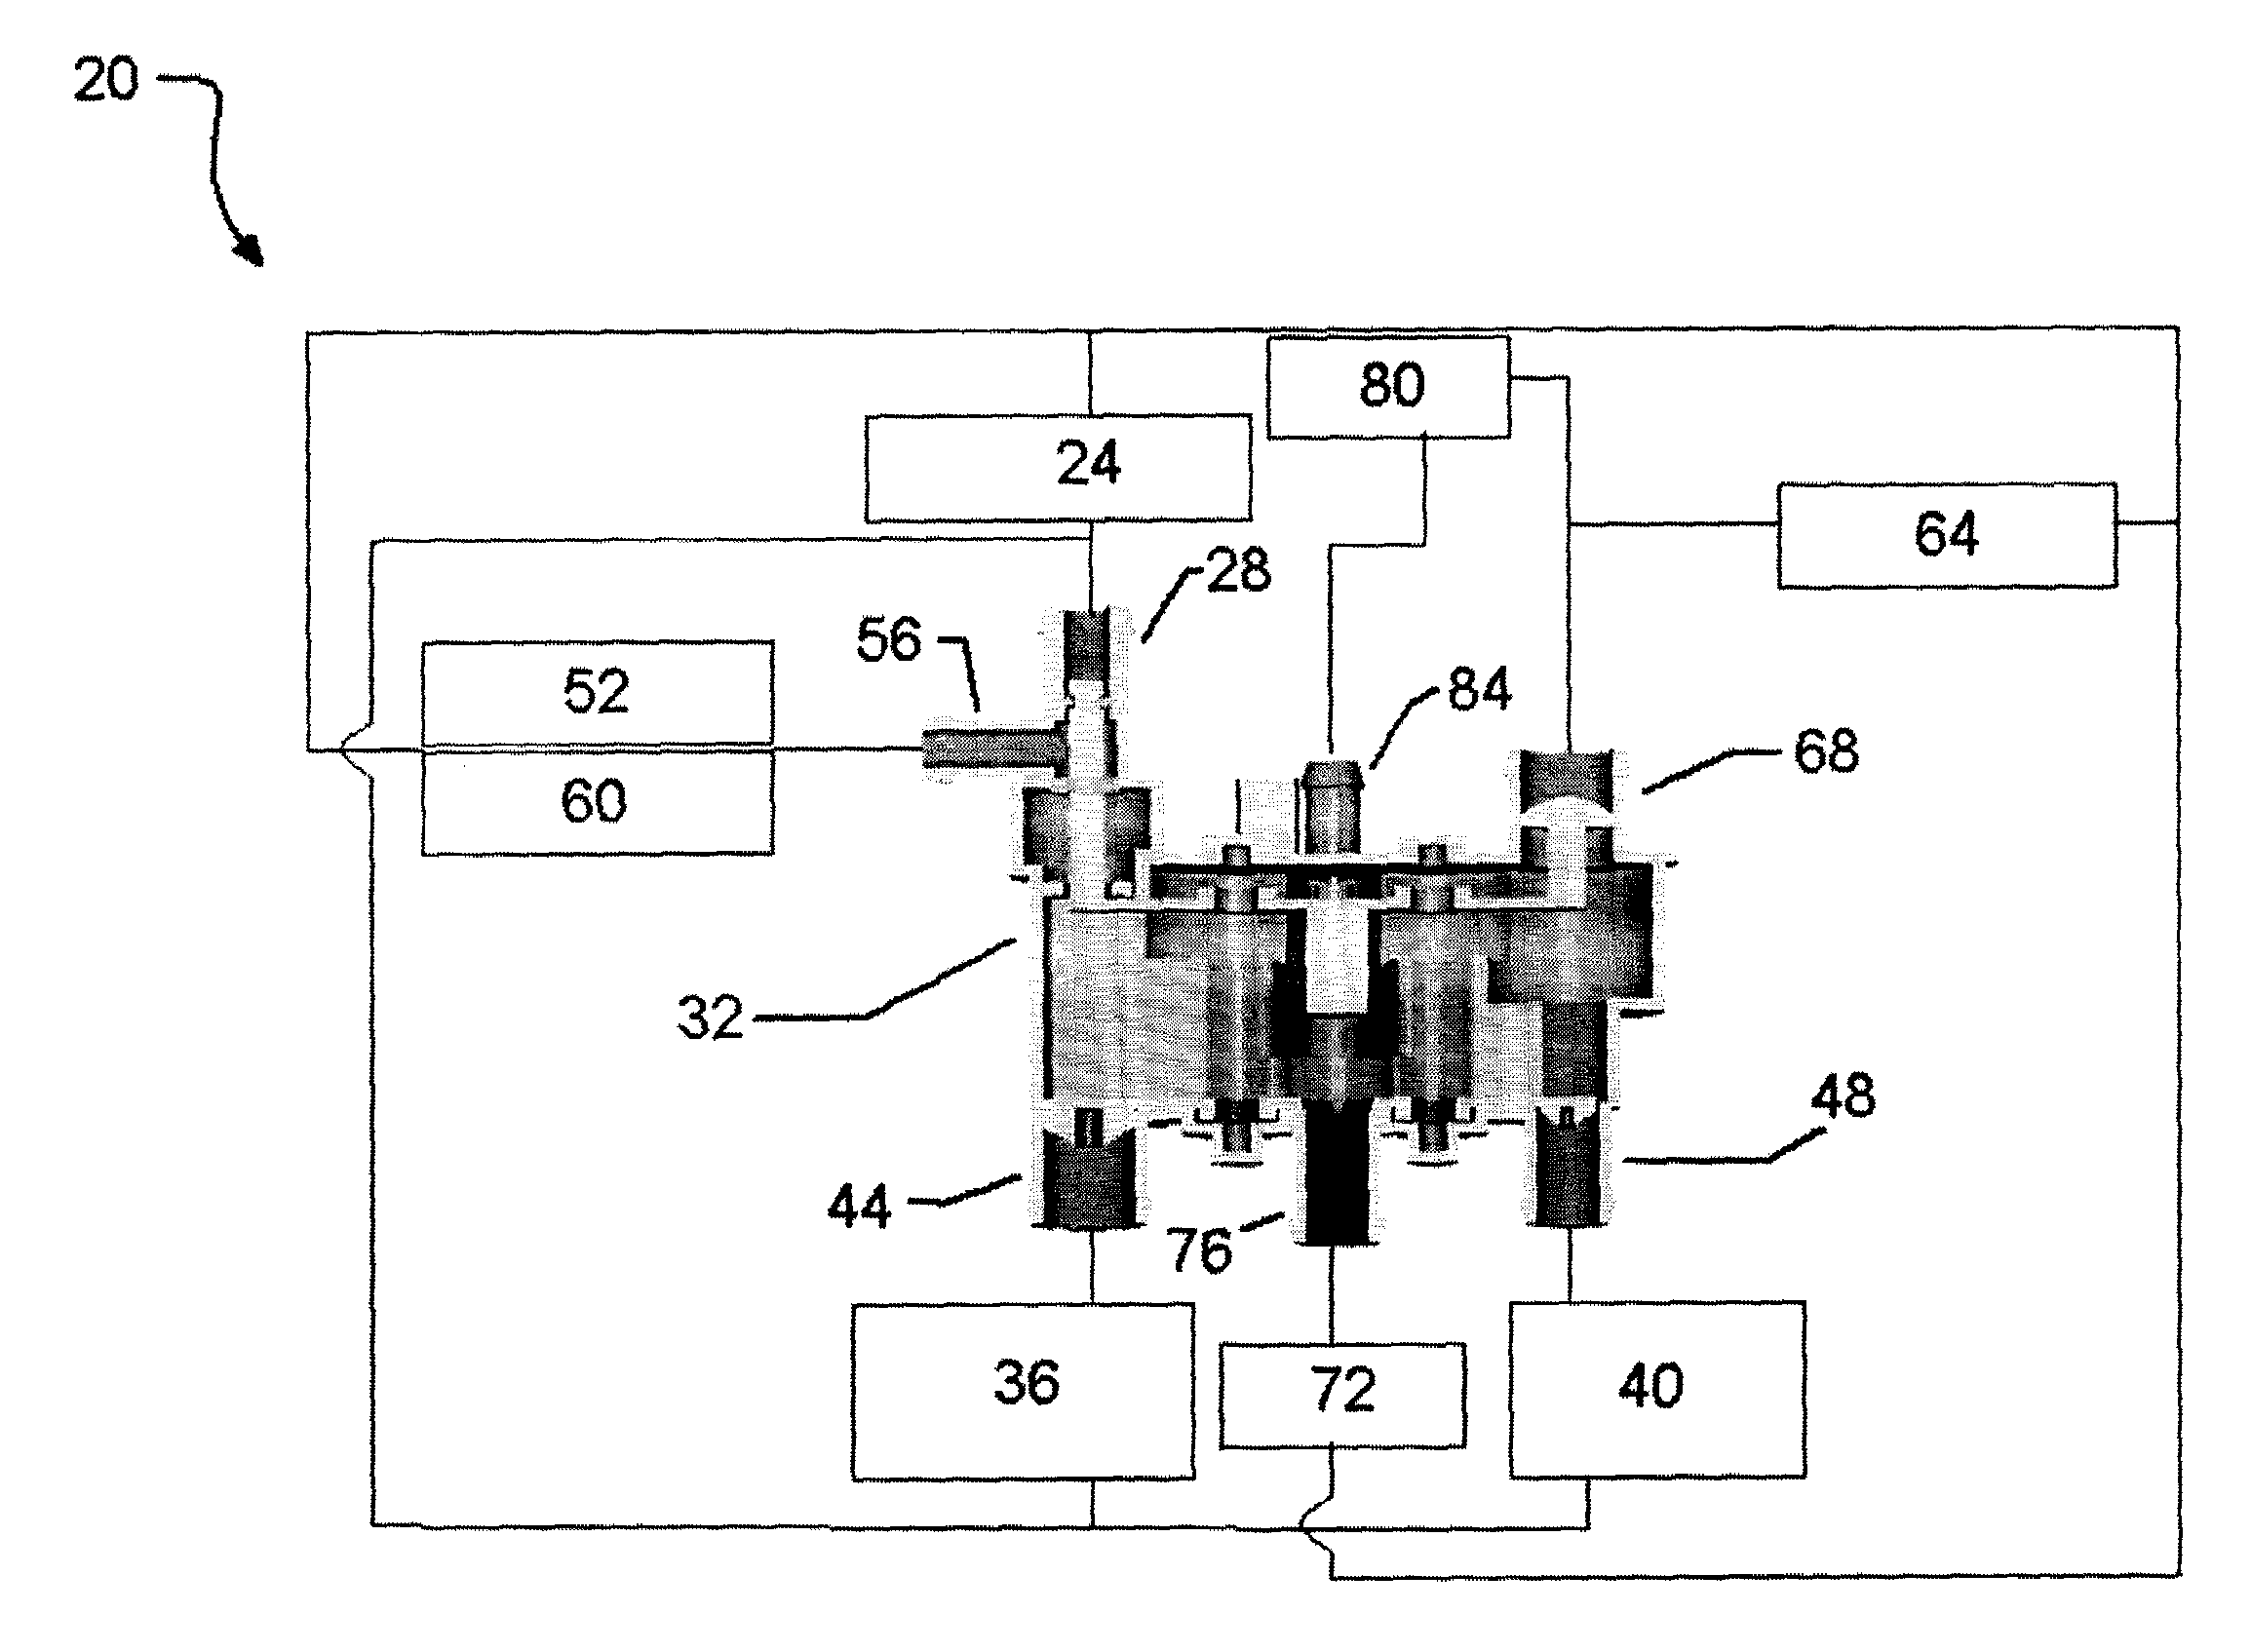 Vehicle Cooling System with Directed Flows